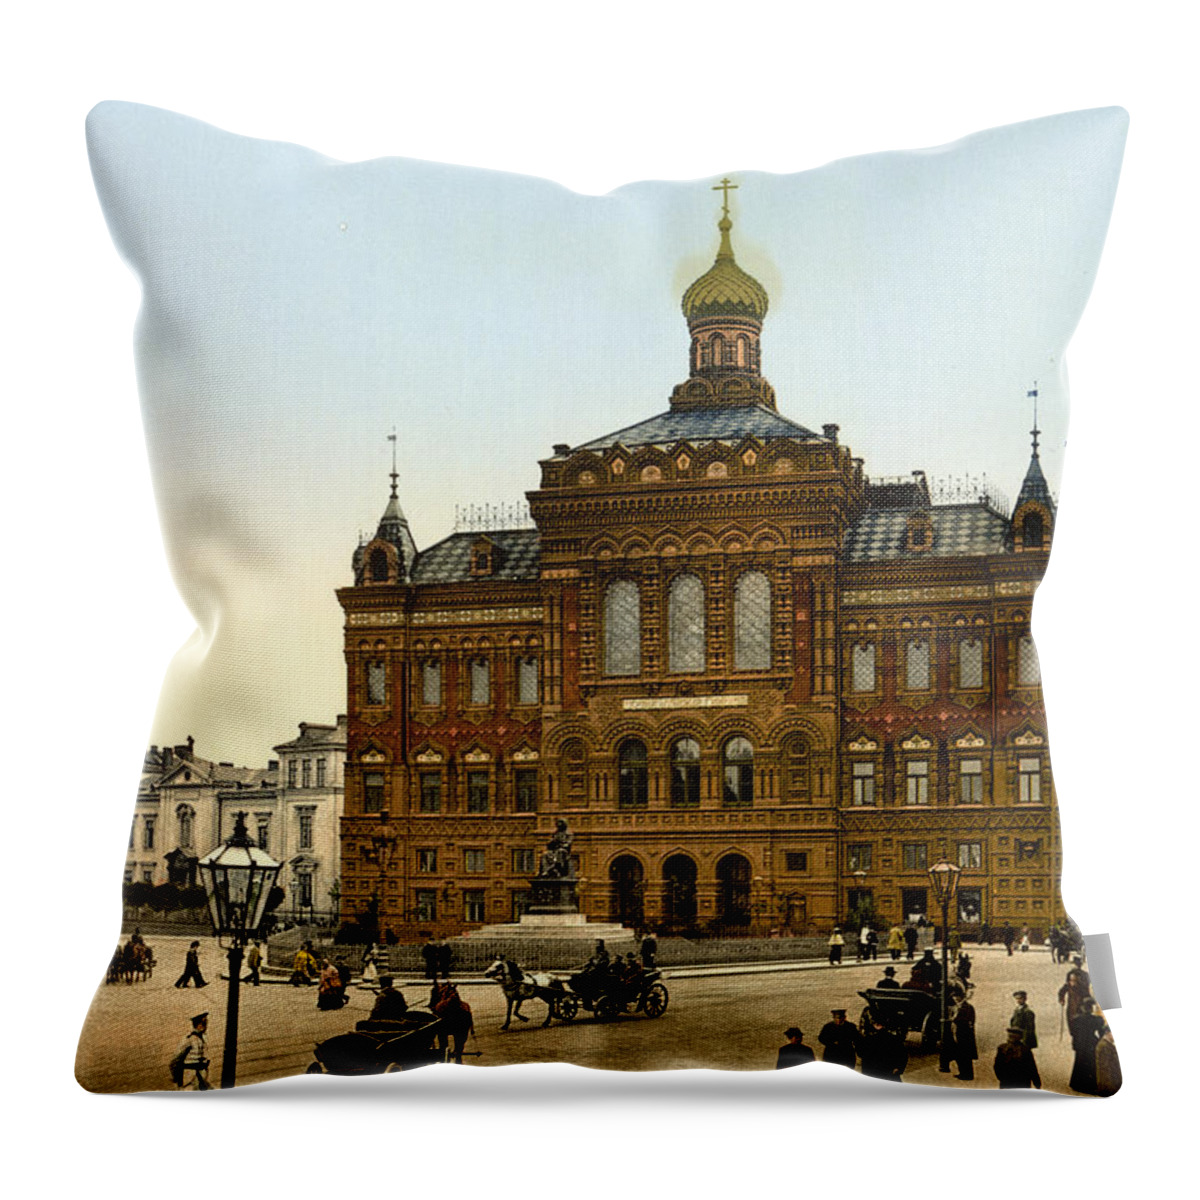 nicolaus Copernicus Monument Throw Pillow featuring the photograph Nicolaus Copernicus Monument in Warsaw Poland by International Images